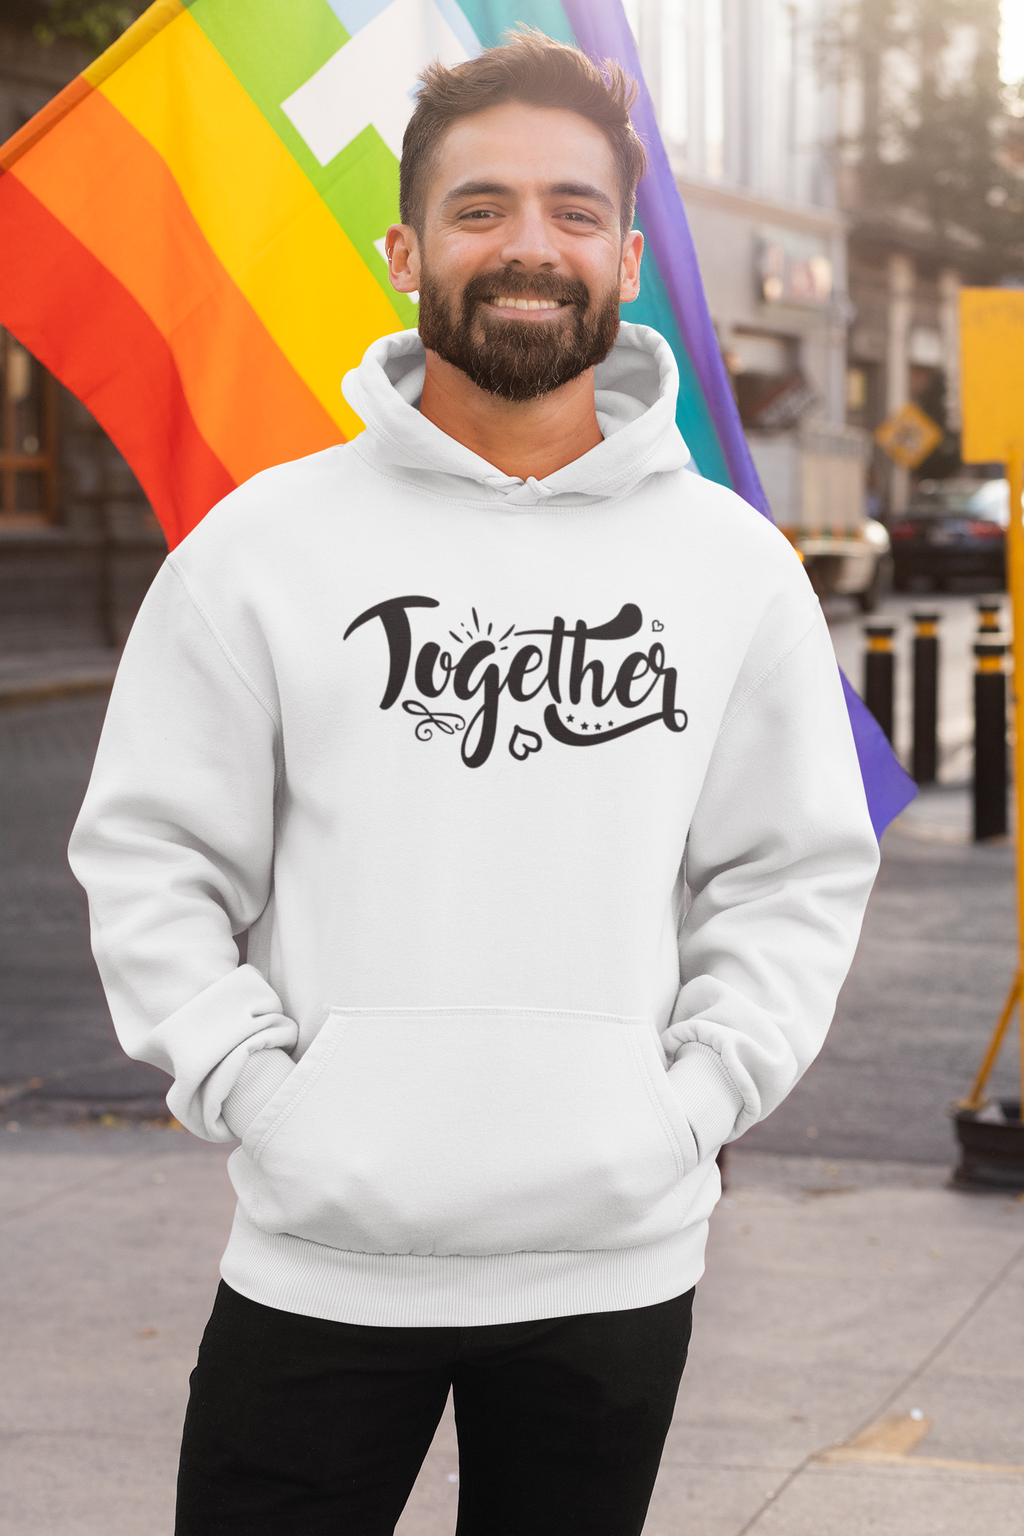 Together Unisex Hooded Sweatshirt, Classic Fit, Gift item - Cheers Together Gift House